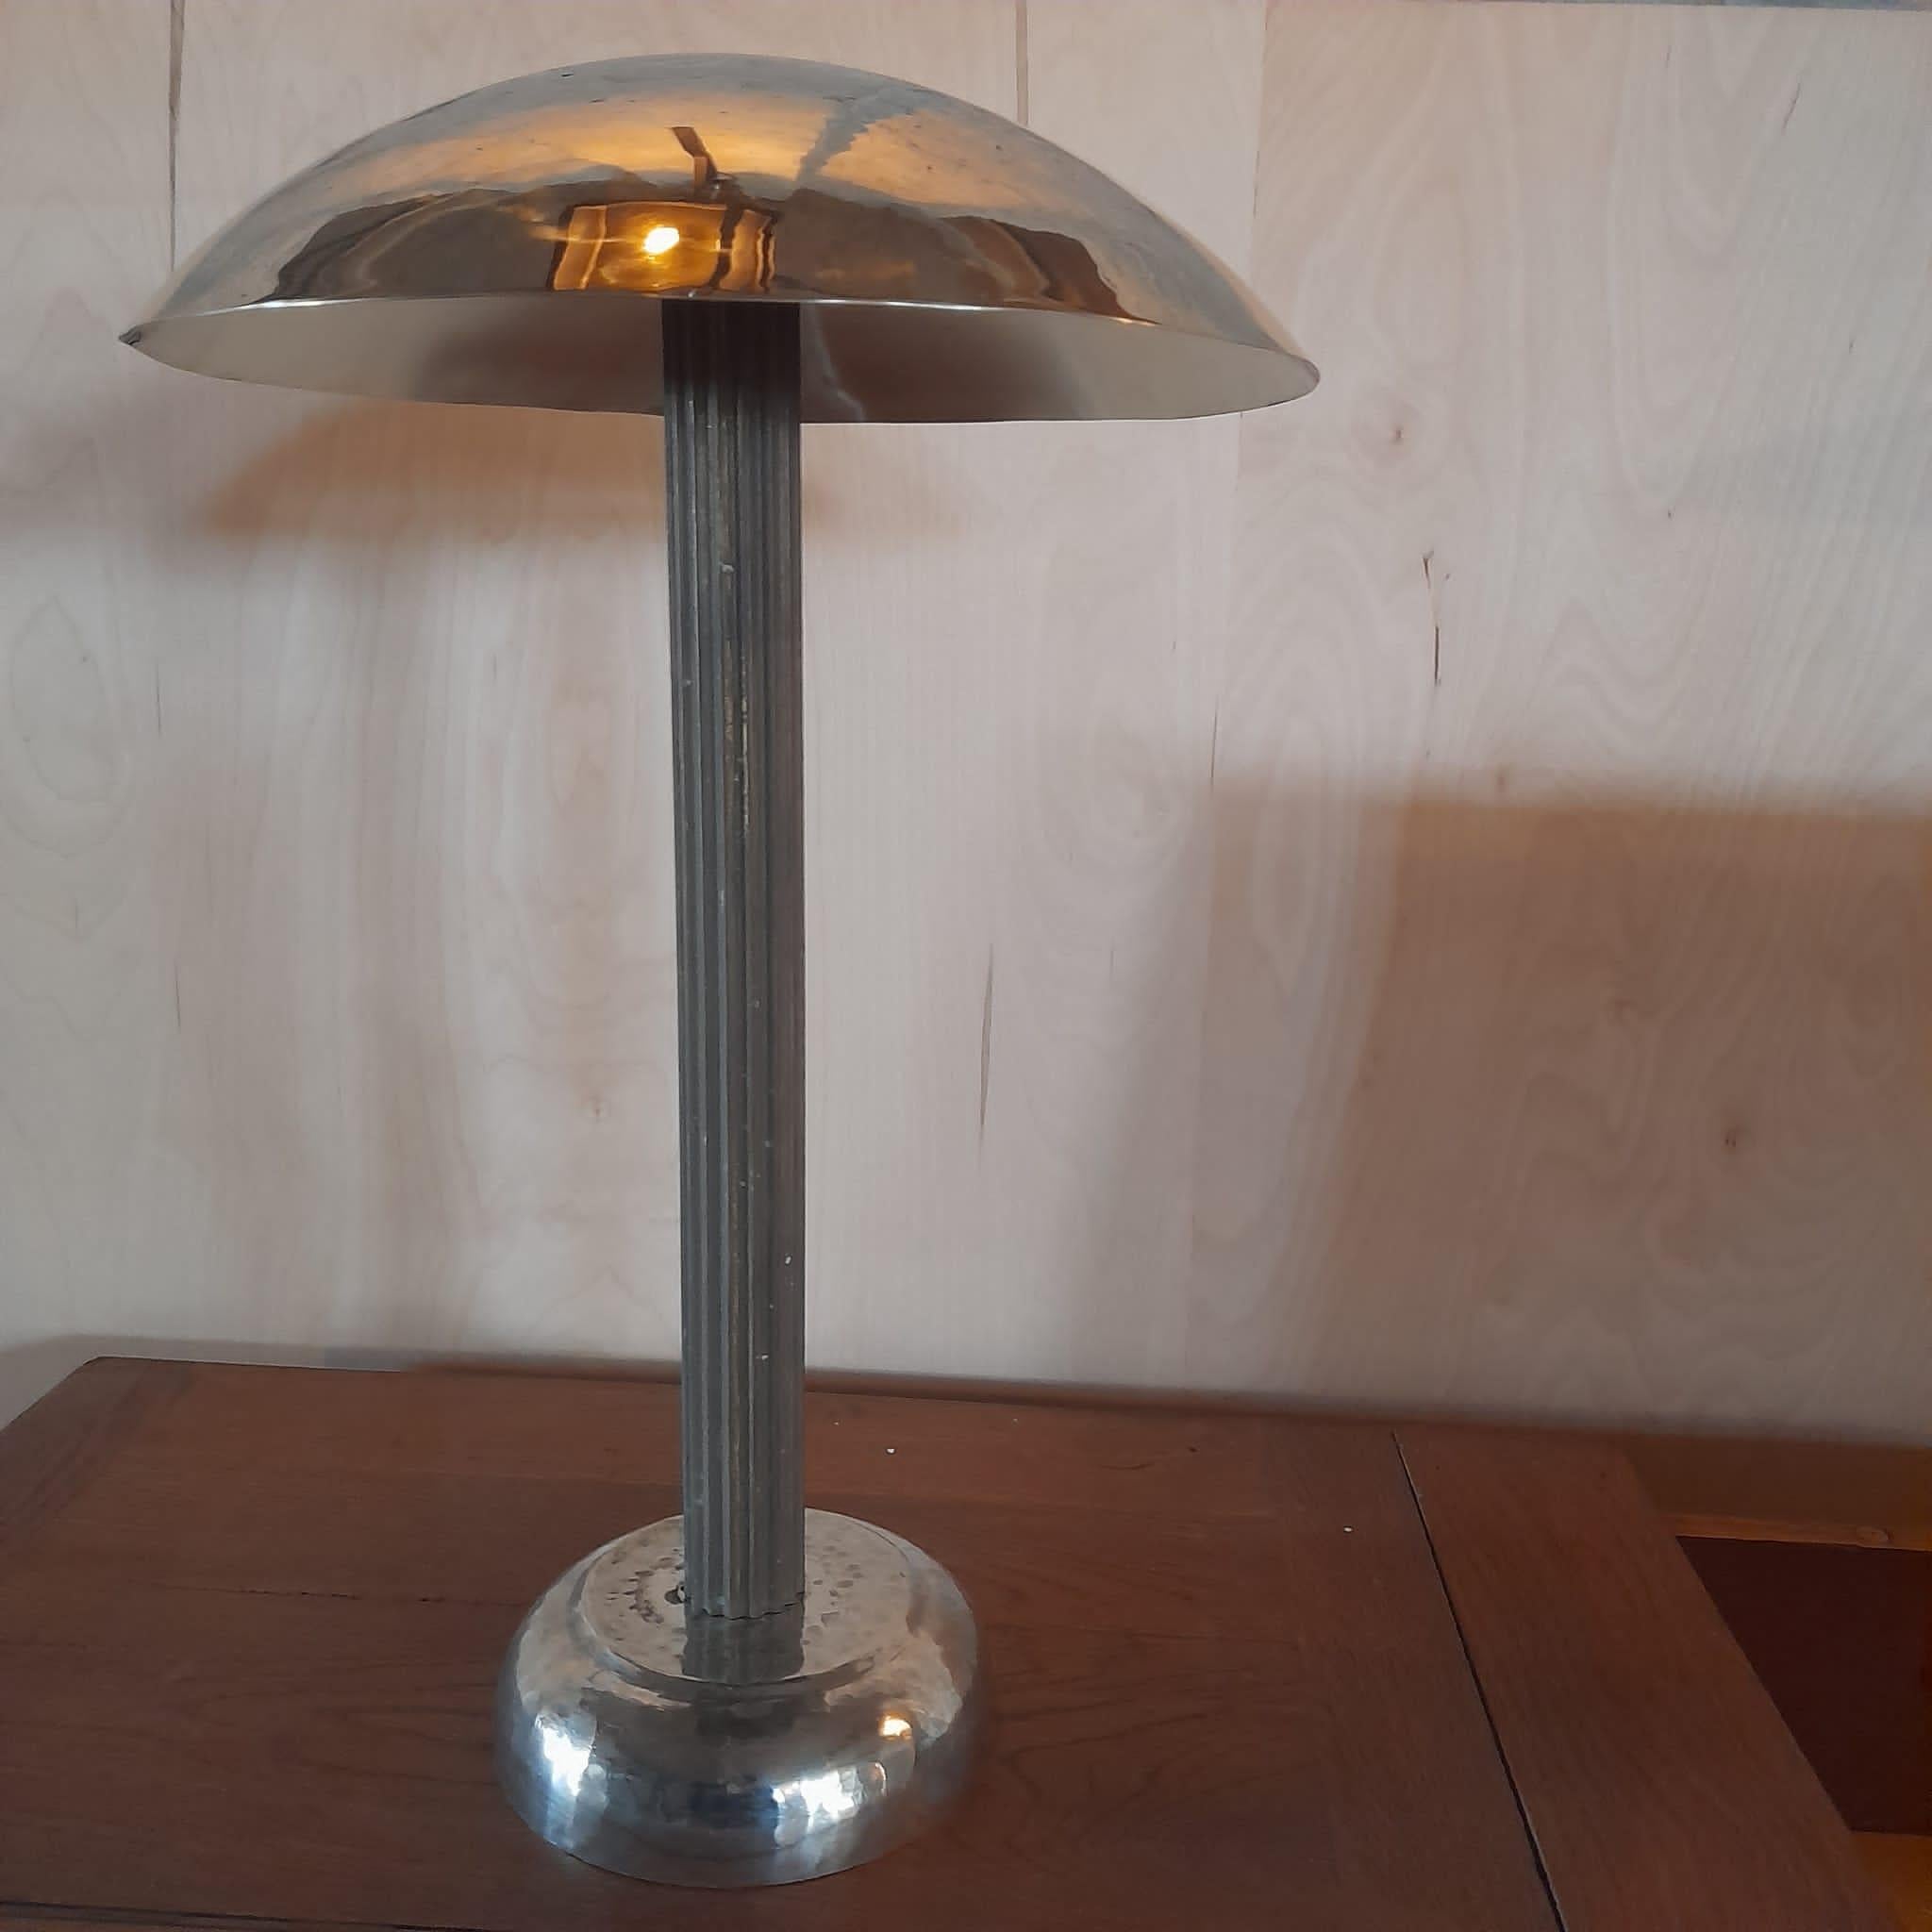 This table lamp is made of alpaca (mixture of cupper, zinc, nickel). The base is in brass, foot in alpaca. Under the lampshade 2 e27 ball lamps.